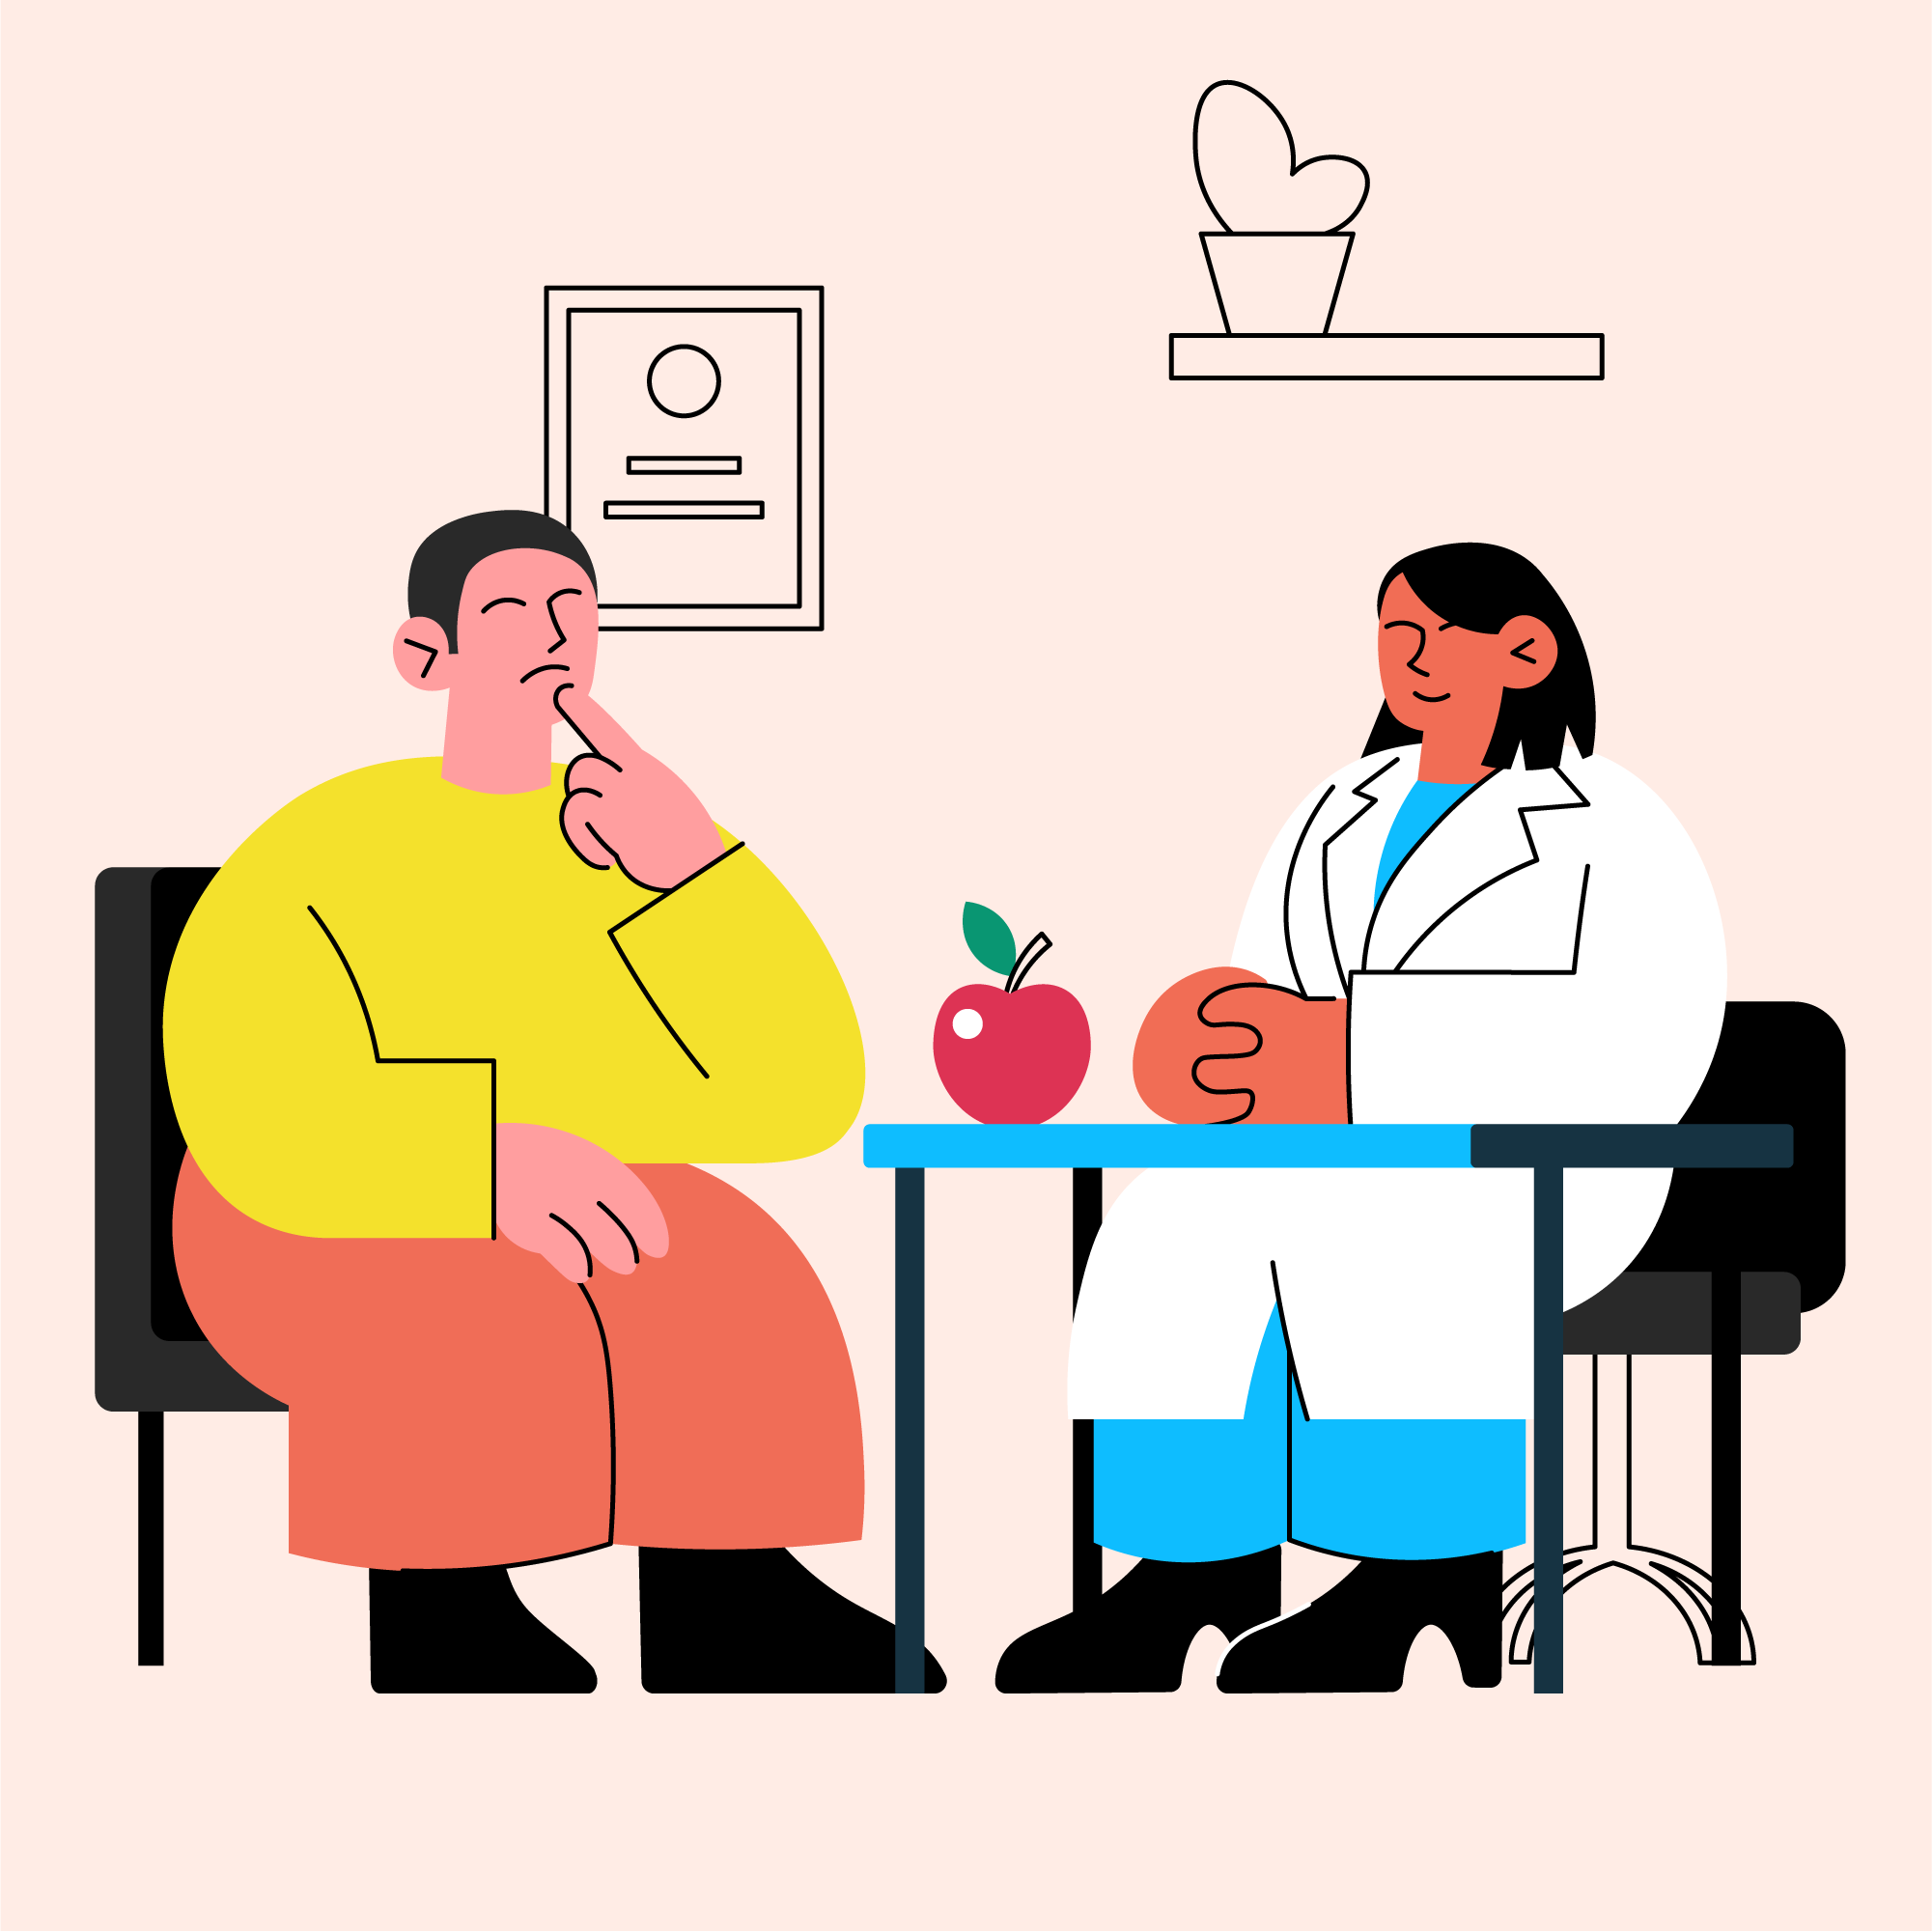 Salmon background. Two people are sitting in a doctors office. On the left, a person with short black hair, wearing red pants and a yellow top, is sitting in a black chair. On the right, a person in a white doctors coat and blue scrubs is sitting in a black chair with their hands crossed on a black and blue table. 